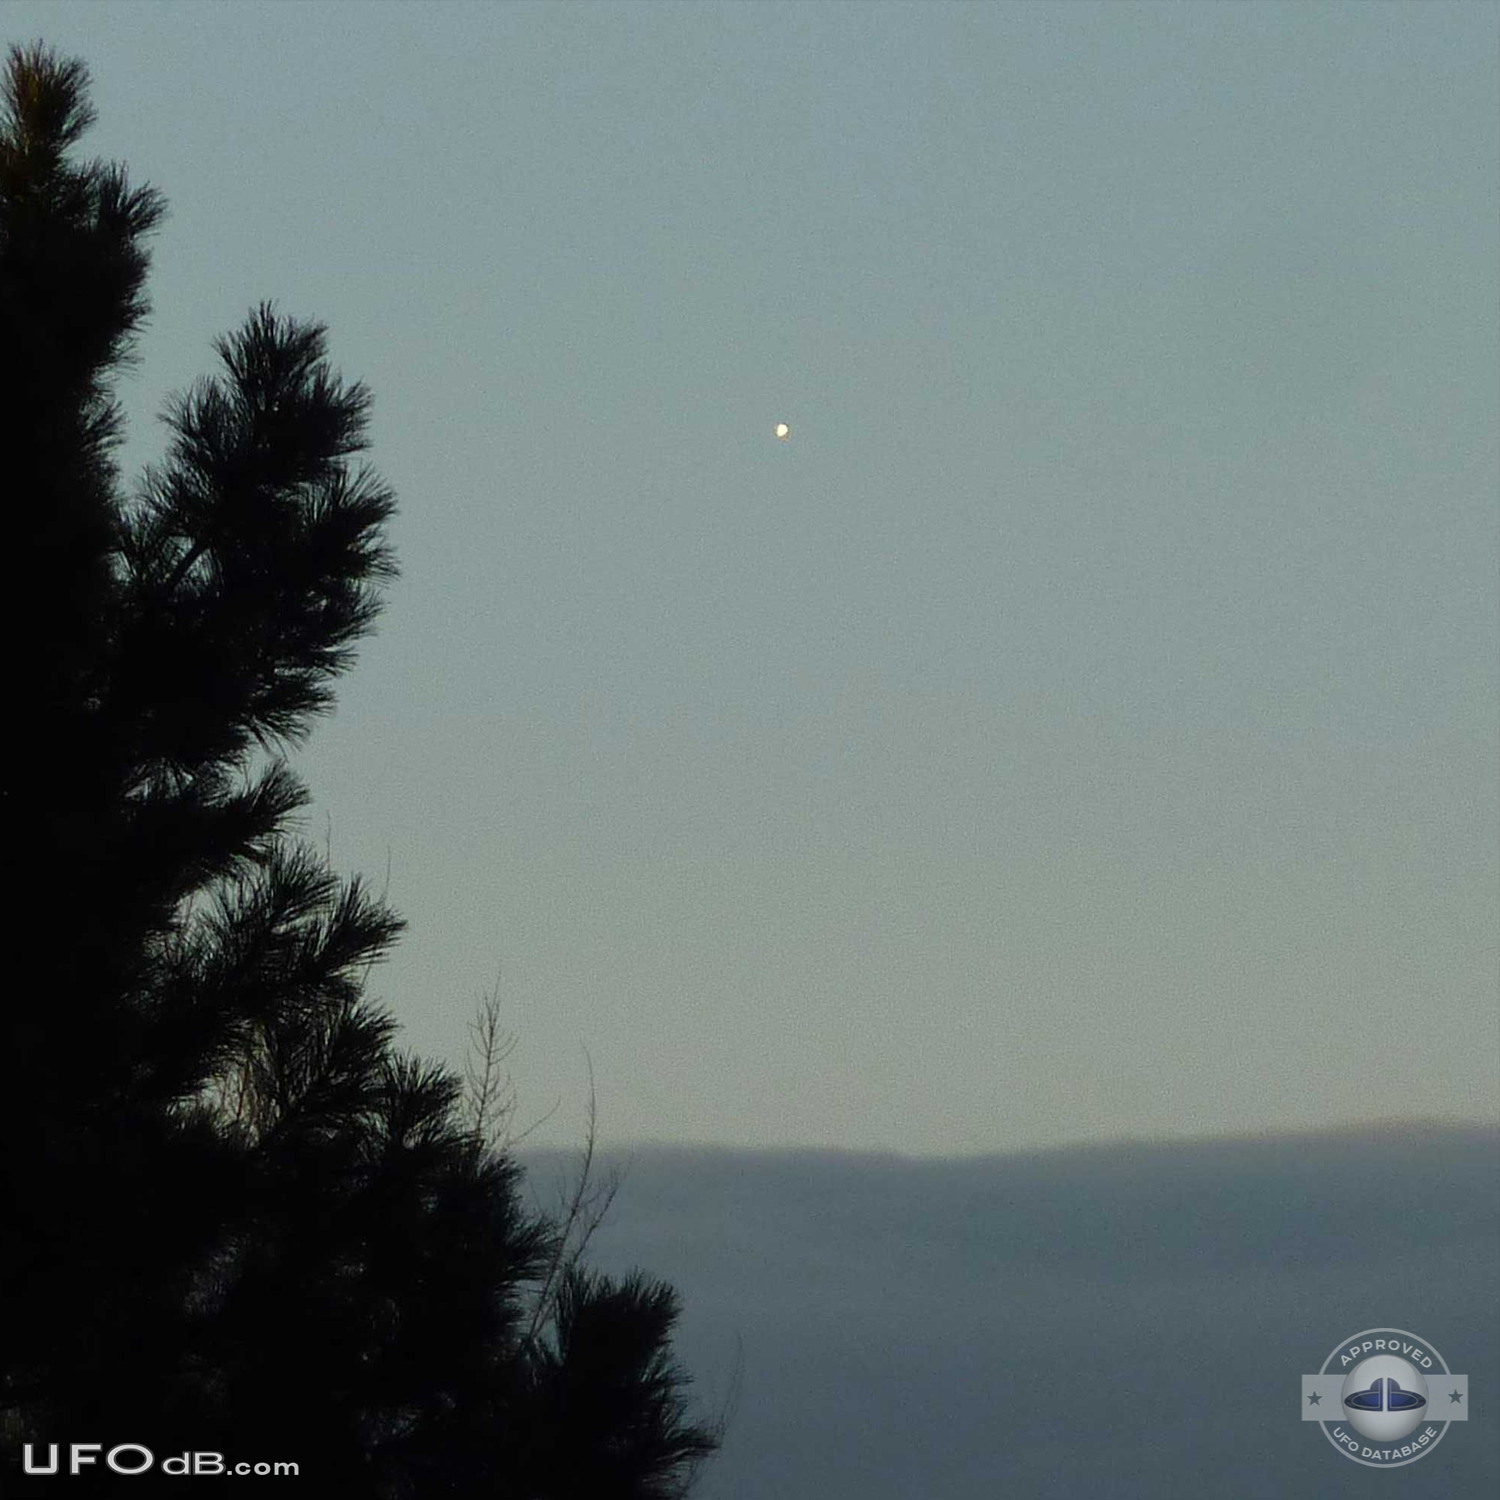 Orb UFO caught on picture in the sky of Lakewood Colorado January 2012 UFO Picture #395-1